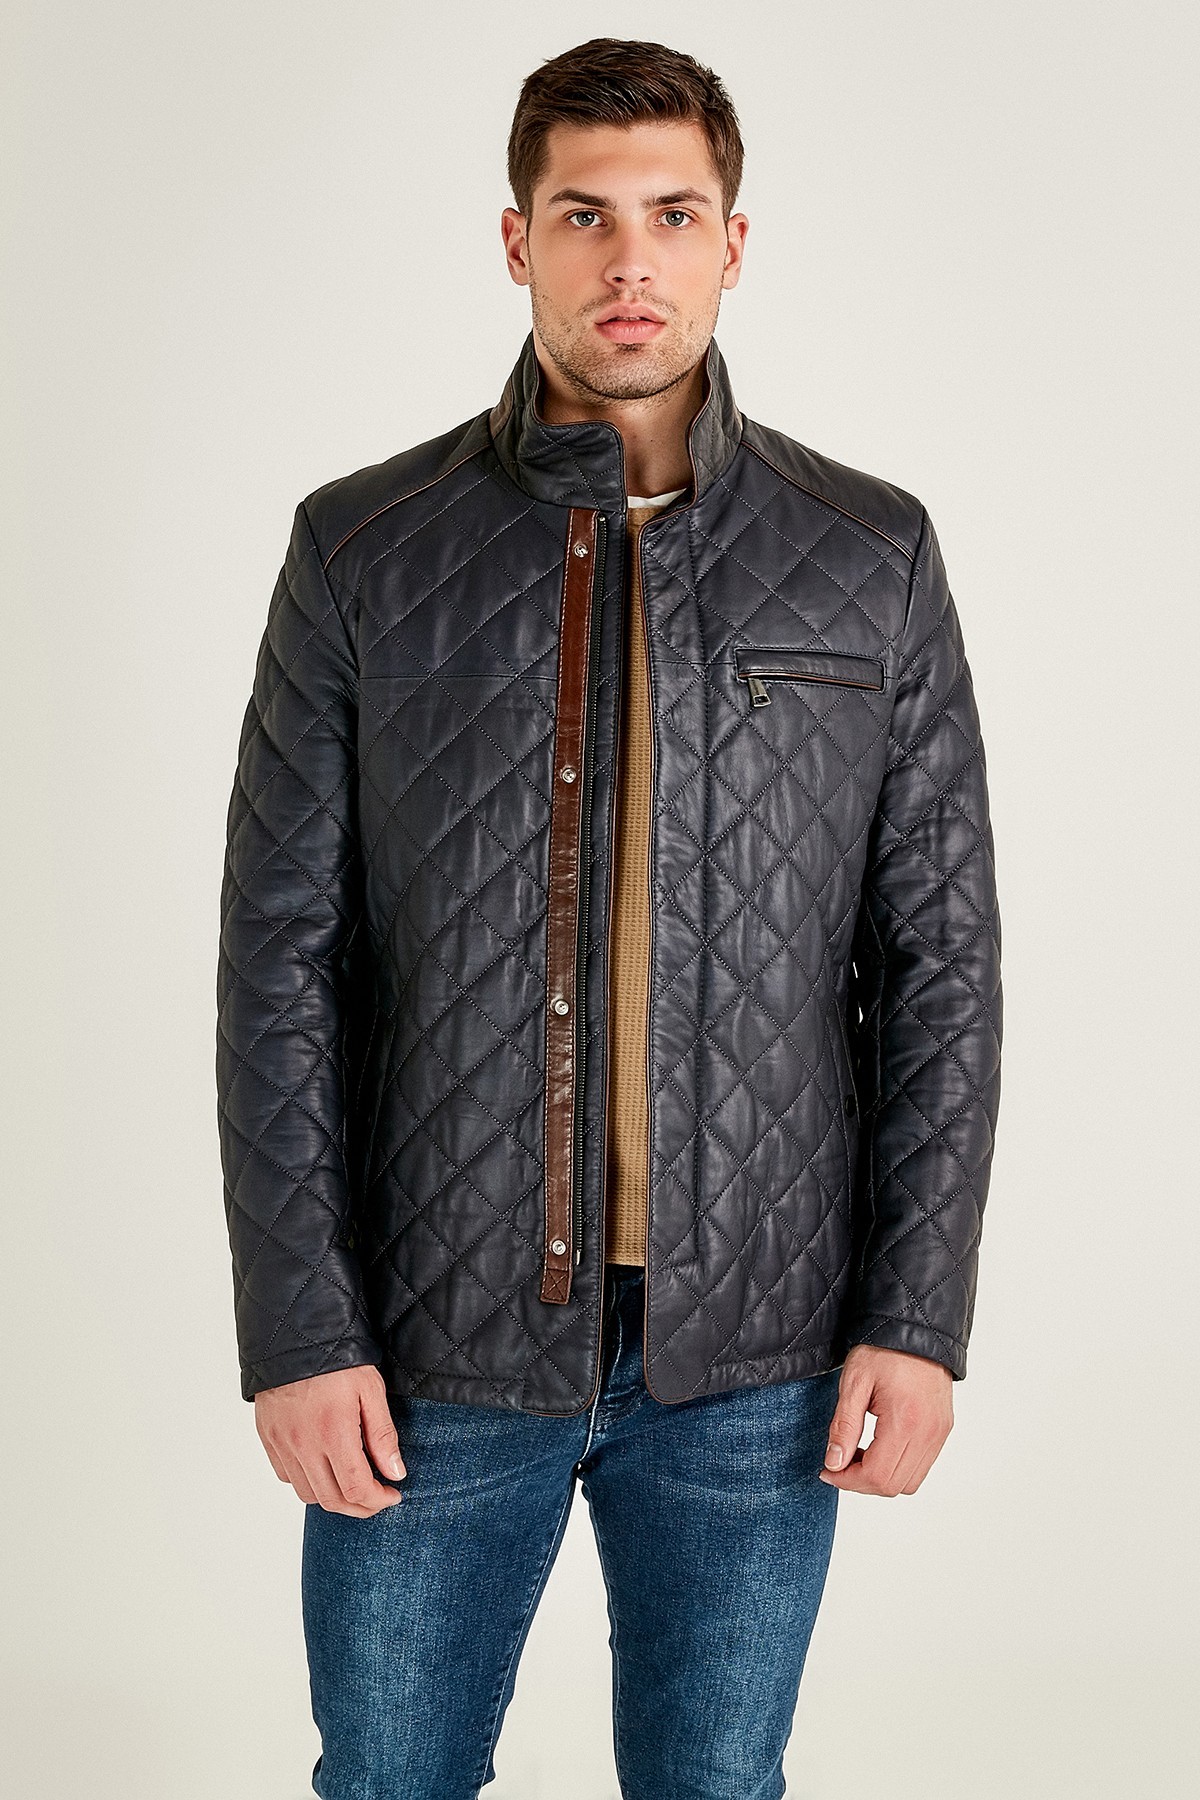 Navy Blue Men's Jacket | Best Quilted Style Leather Outfits